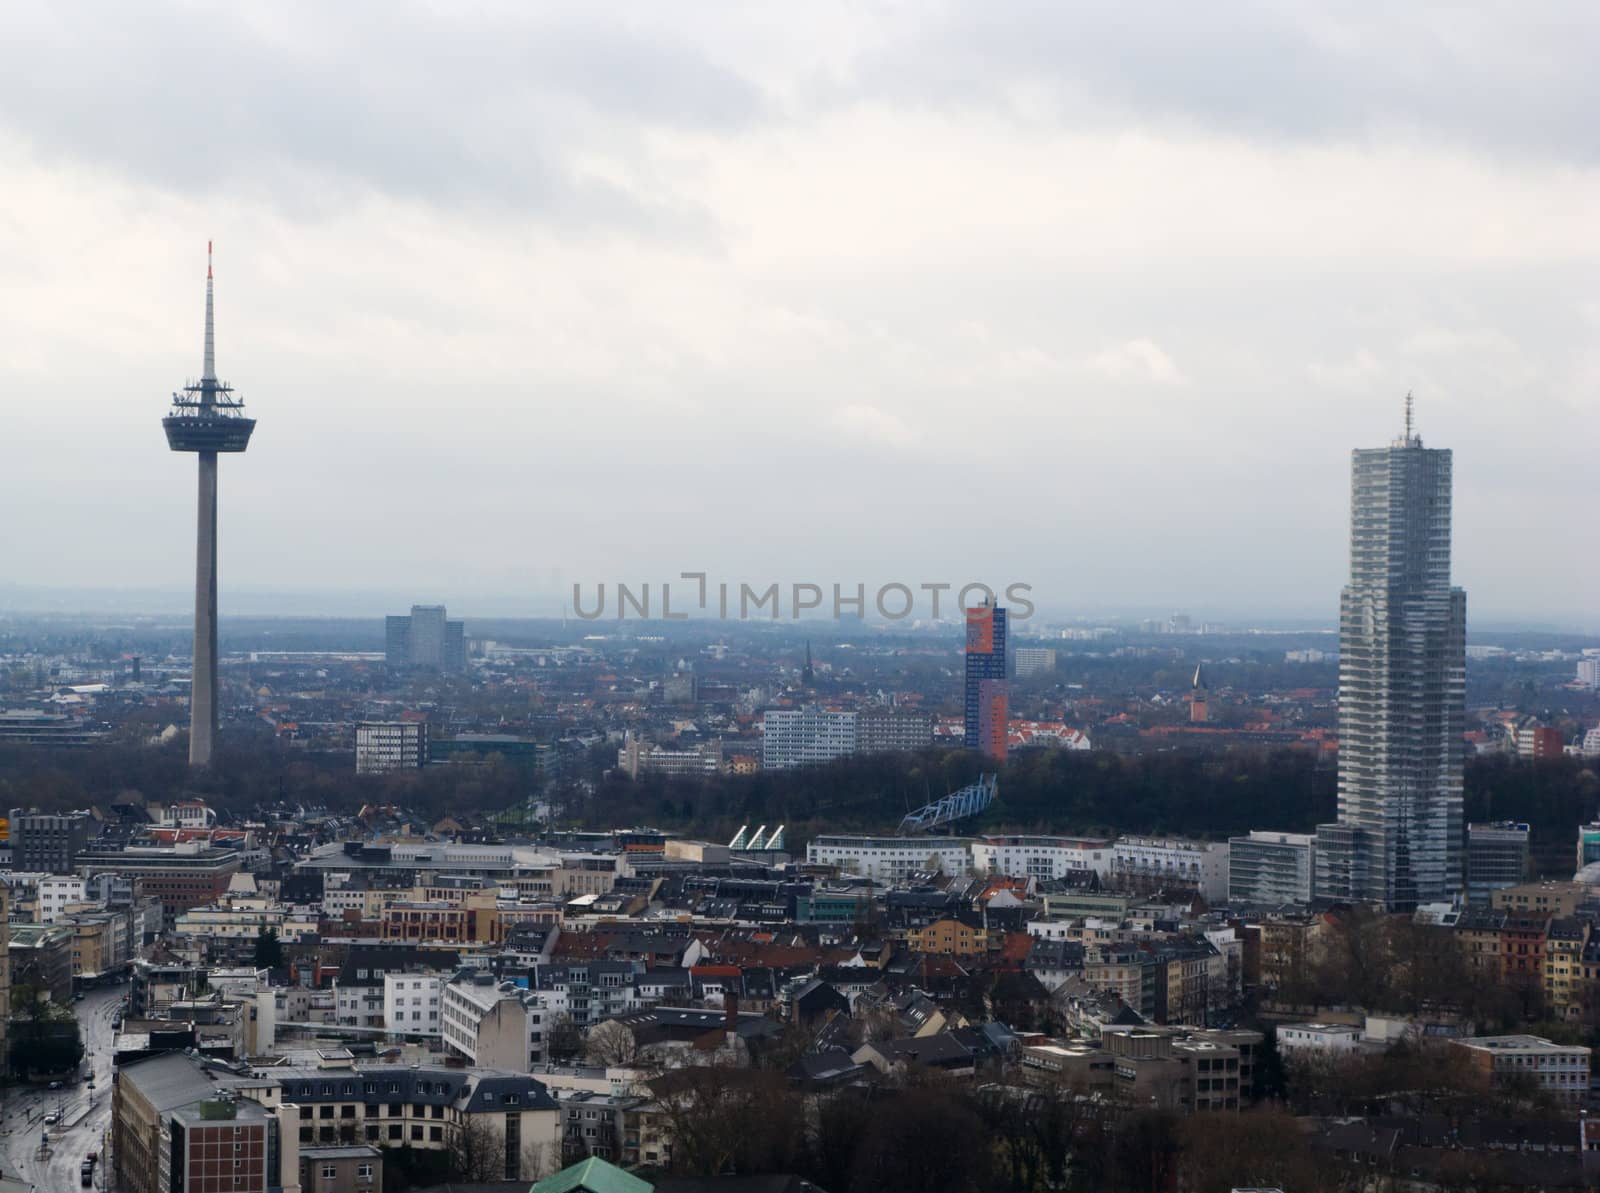 Cityscape of Cologne (Germany) photographed from Cologne Cathedral.